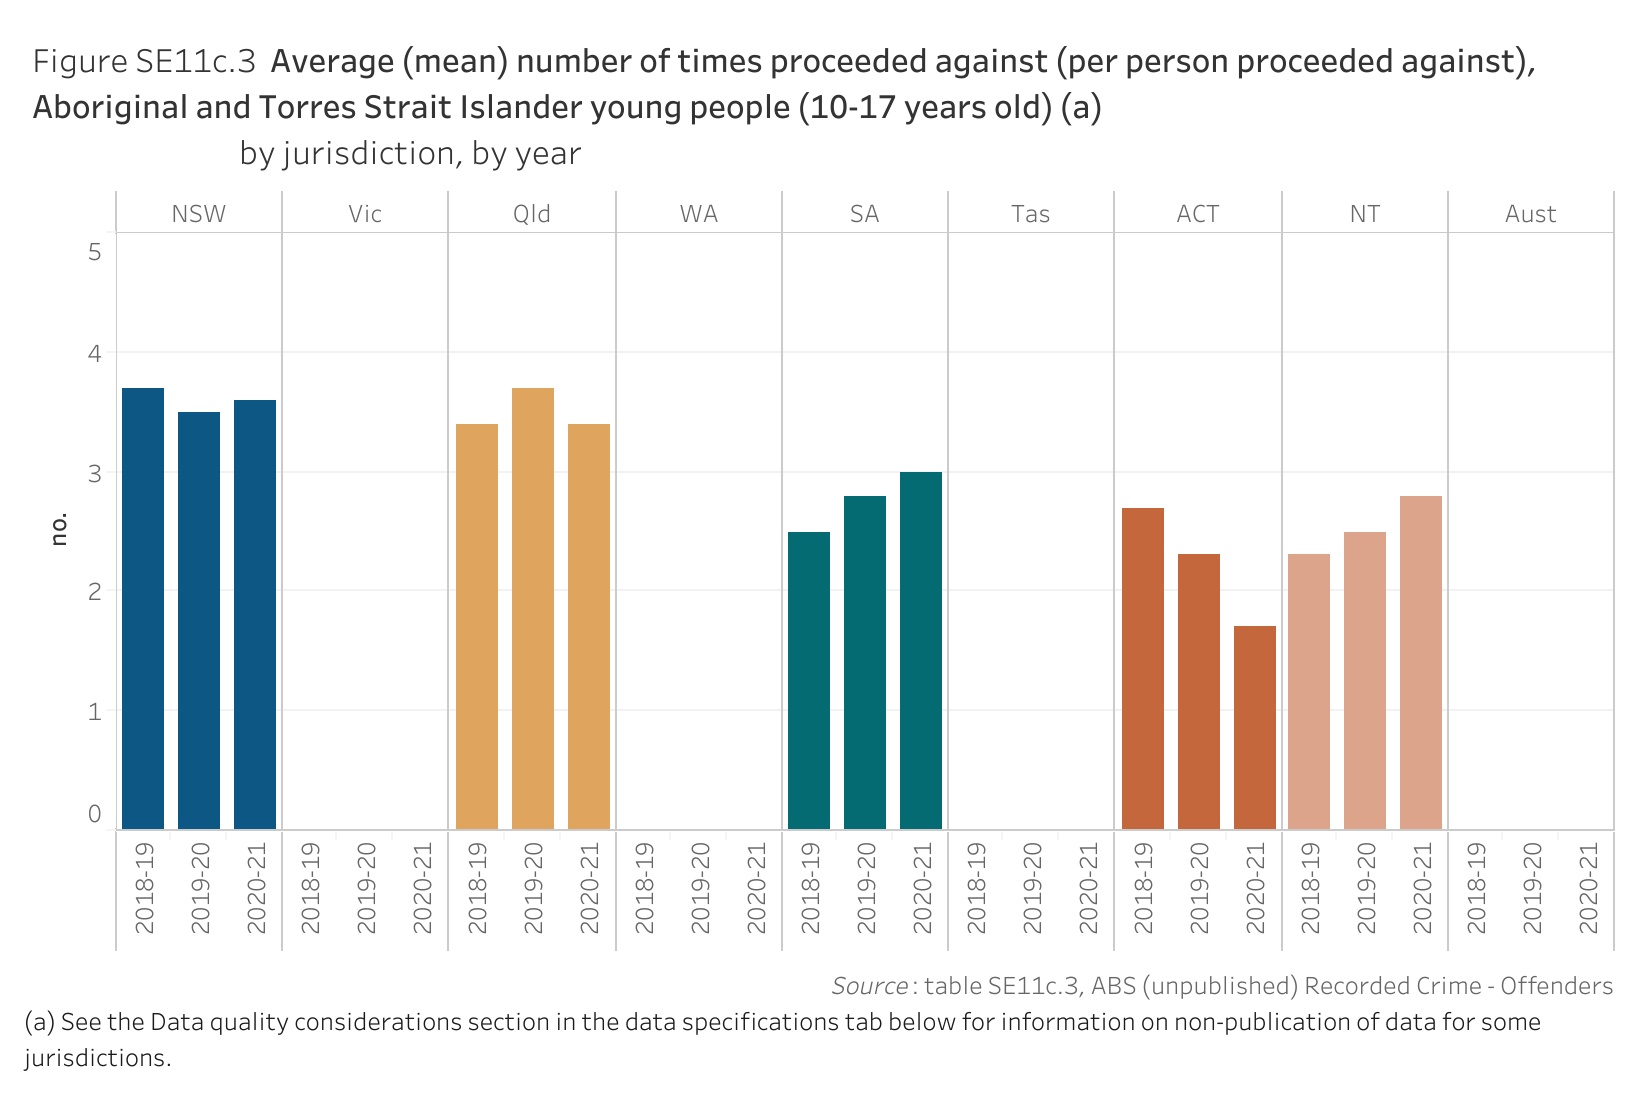 Figure SE11c.3. Average (mean) number of times proceeded against (per person proceeded against), Aboriginal and Torres Strait Islander young people (10-17 years old), by jurisdiction and by year. Data table of figure SE11c.3 is below.